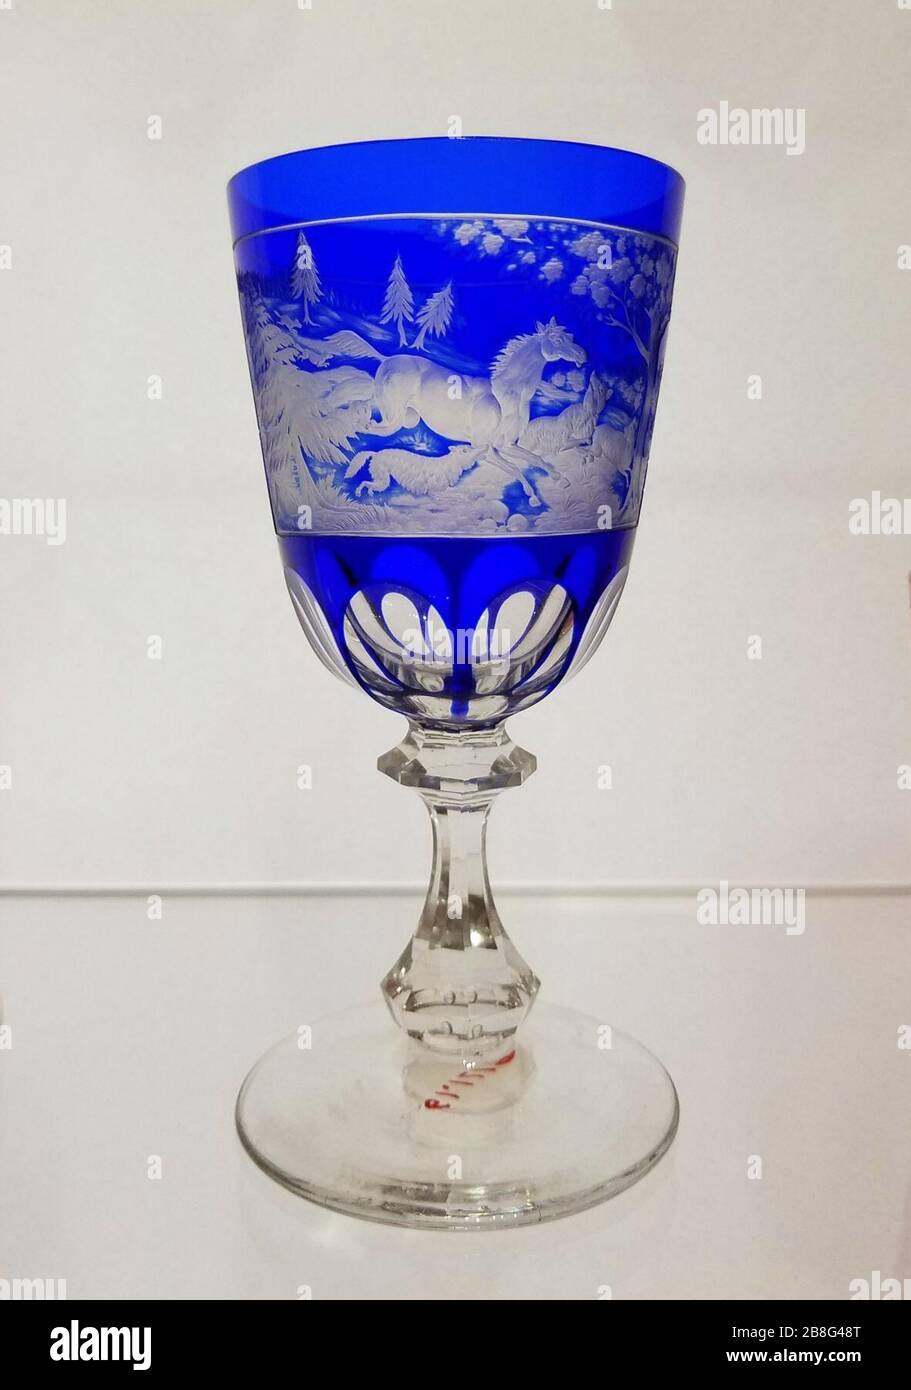 Goblet, Louis F. Vaupel, New England Glass Company, c. 1860-1875, blown, cobalt-blue cased glass, cut and engraved Stock Photo